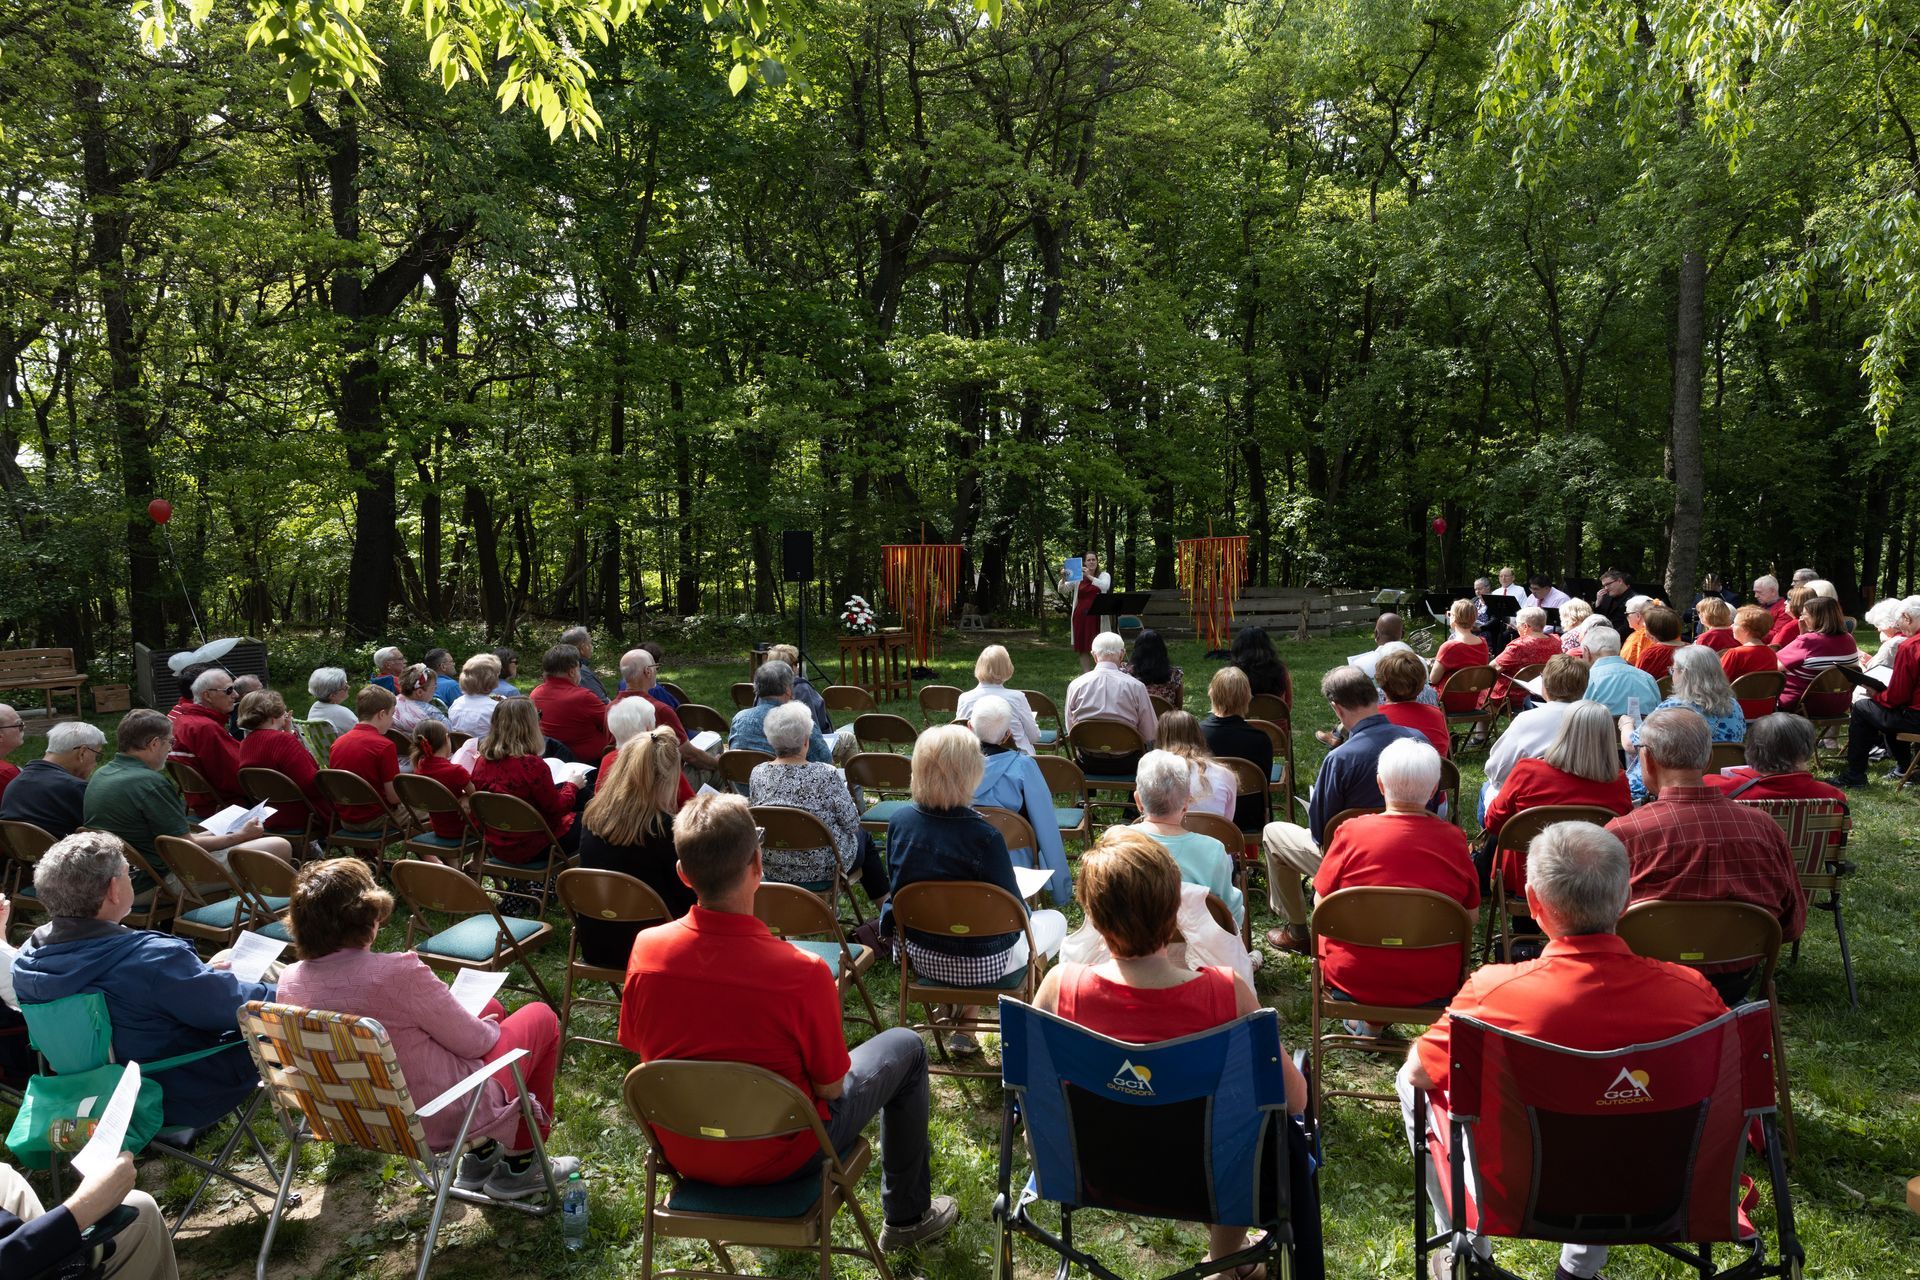 A church congregation gathered outdoors, seated in chairs amidst the woods.